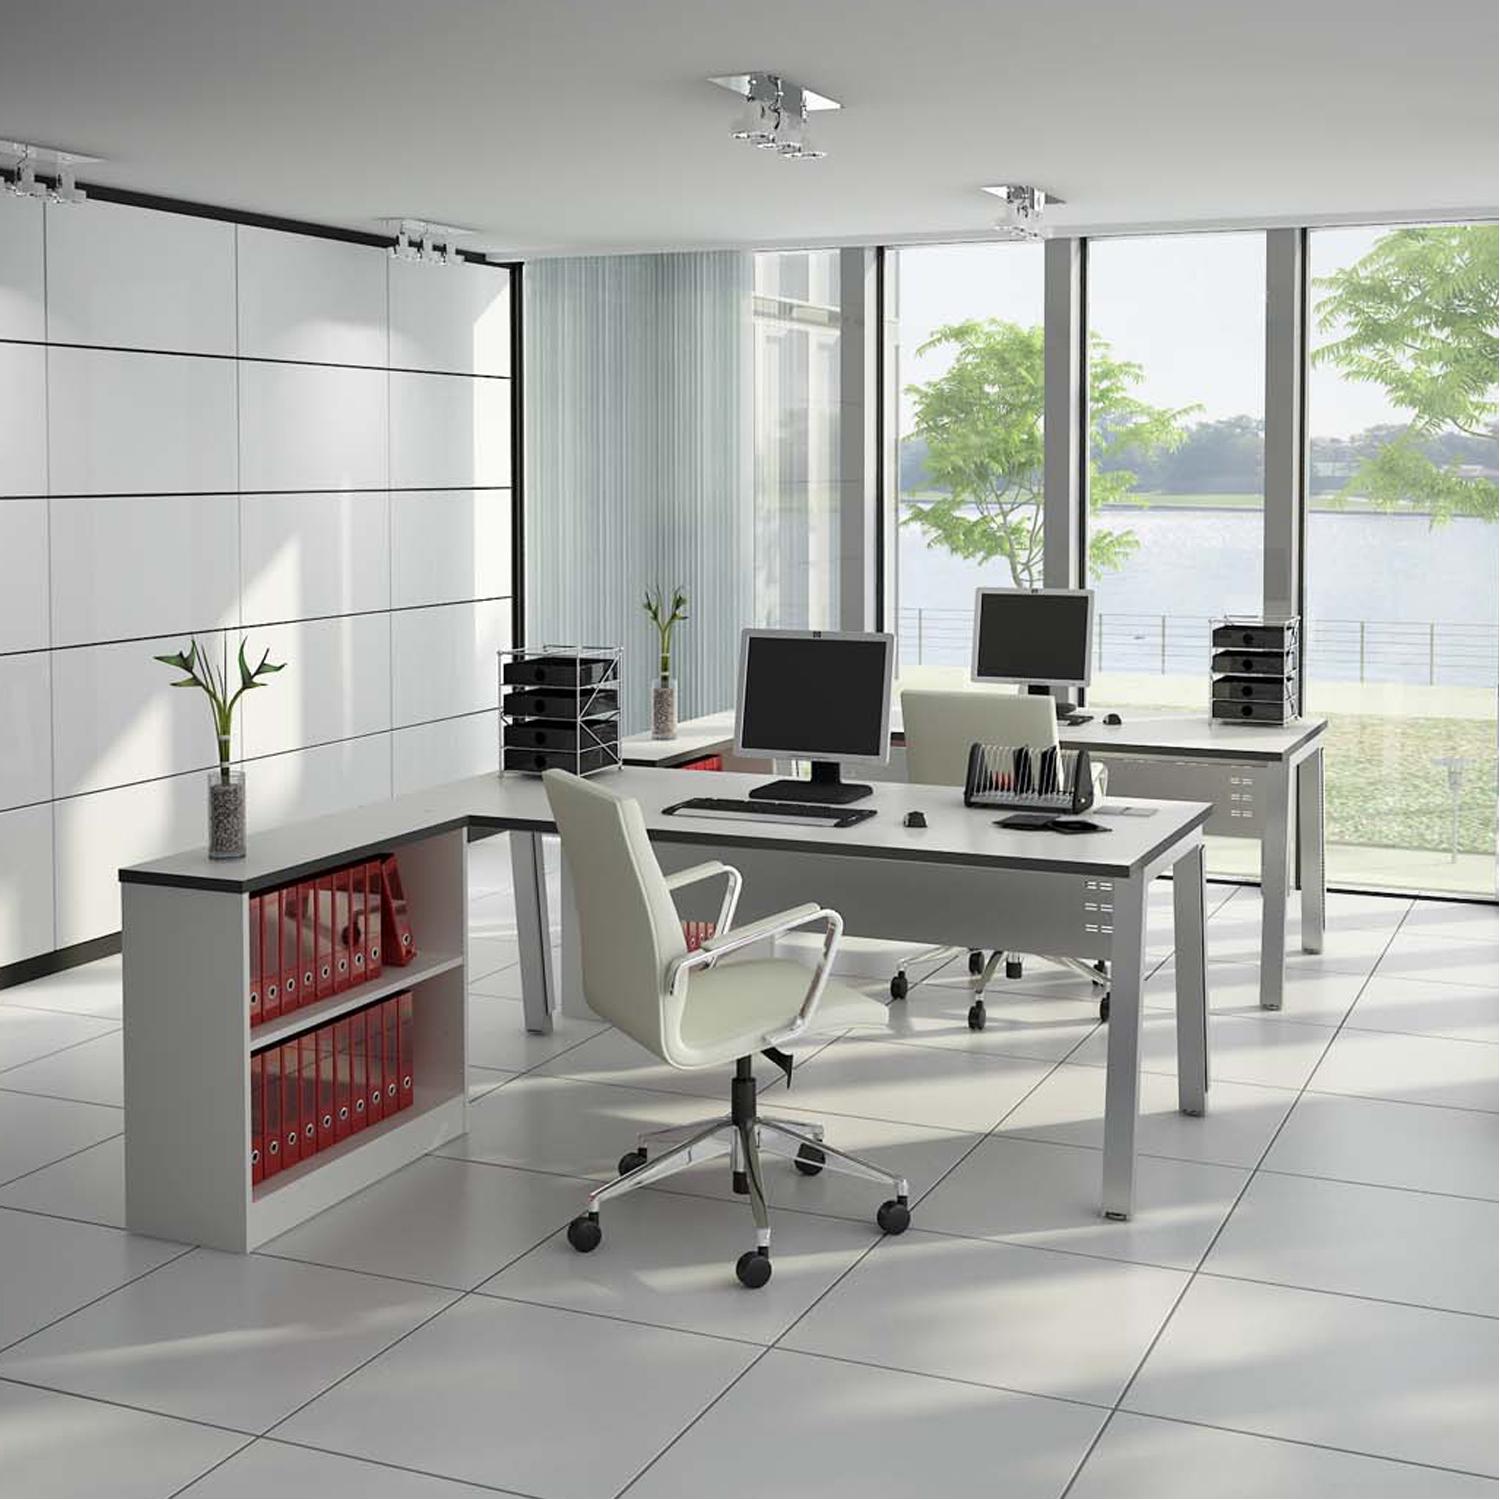 Modern Home Ideas Artistic Modern Home Office Design Ideas Decorated With Grey Computer Desk Completed With White Office Chair Decoration Ideas Office Home Office Design Ideas For Narrow Room